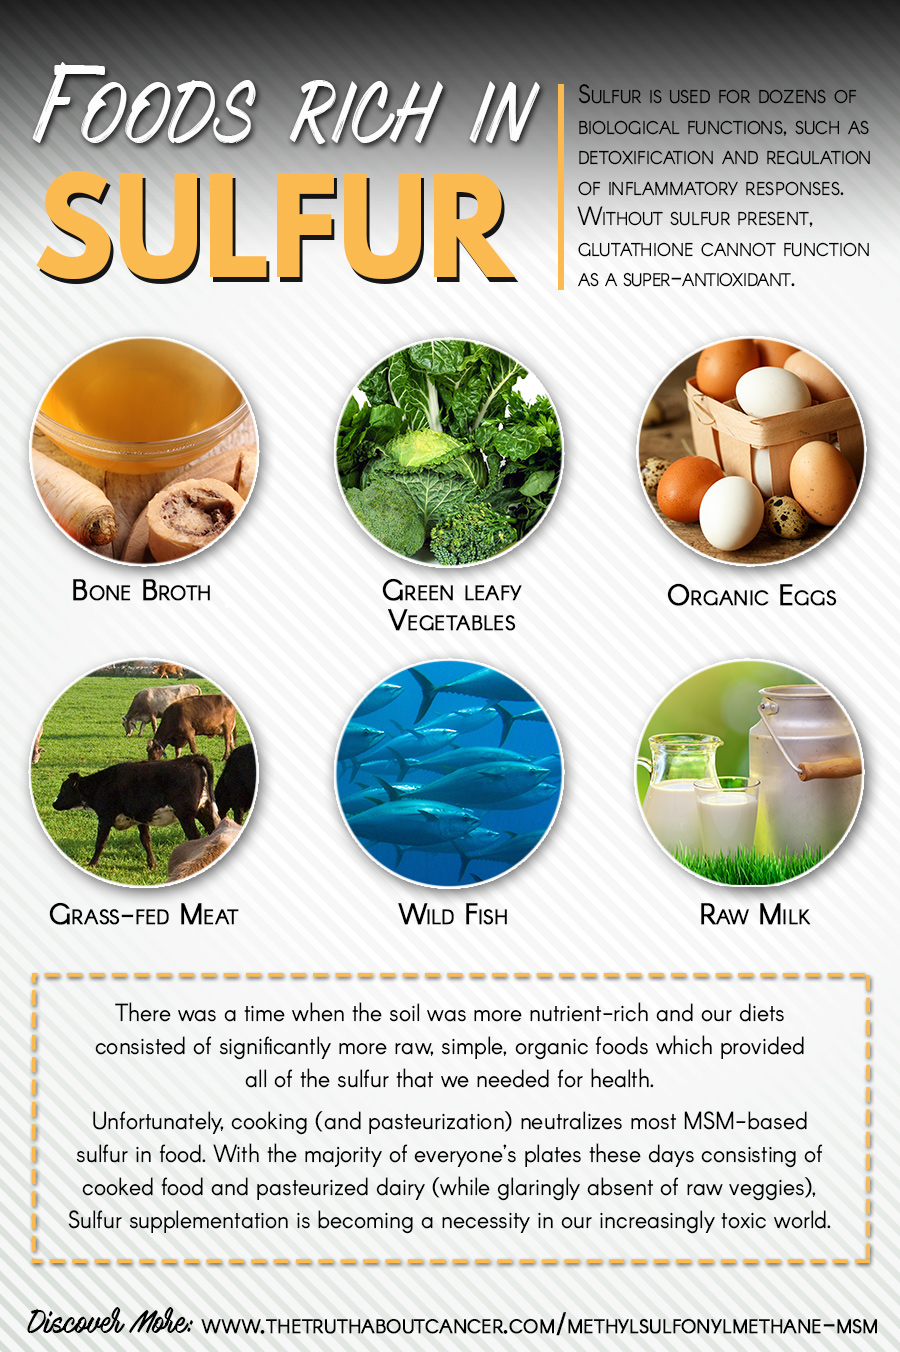 Foods rich in Sulfur by The Truth About Cancer